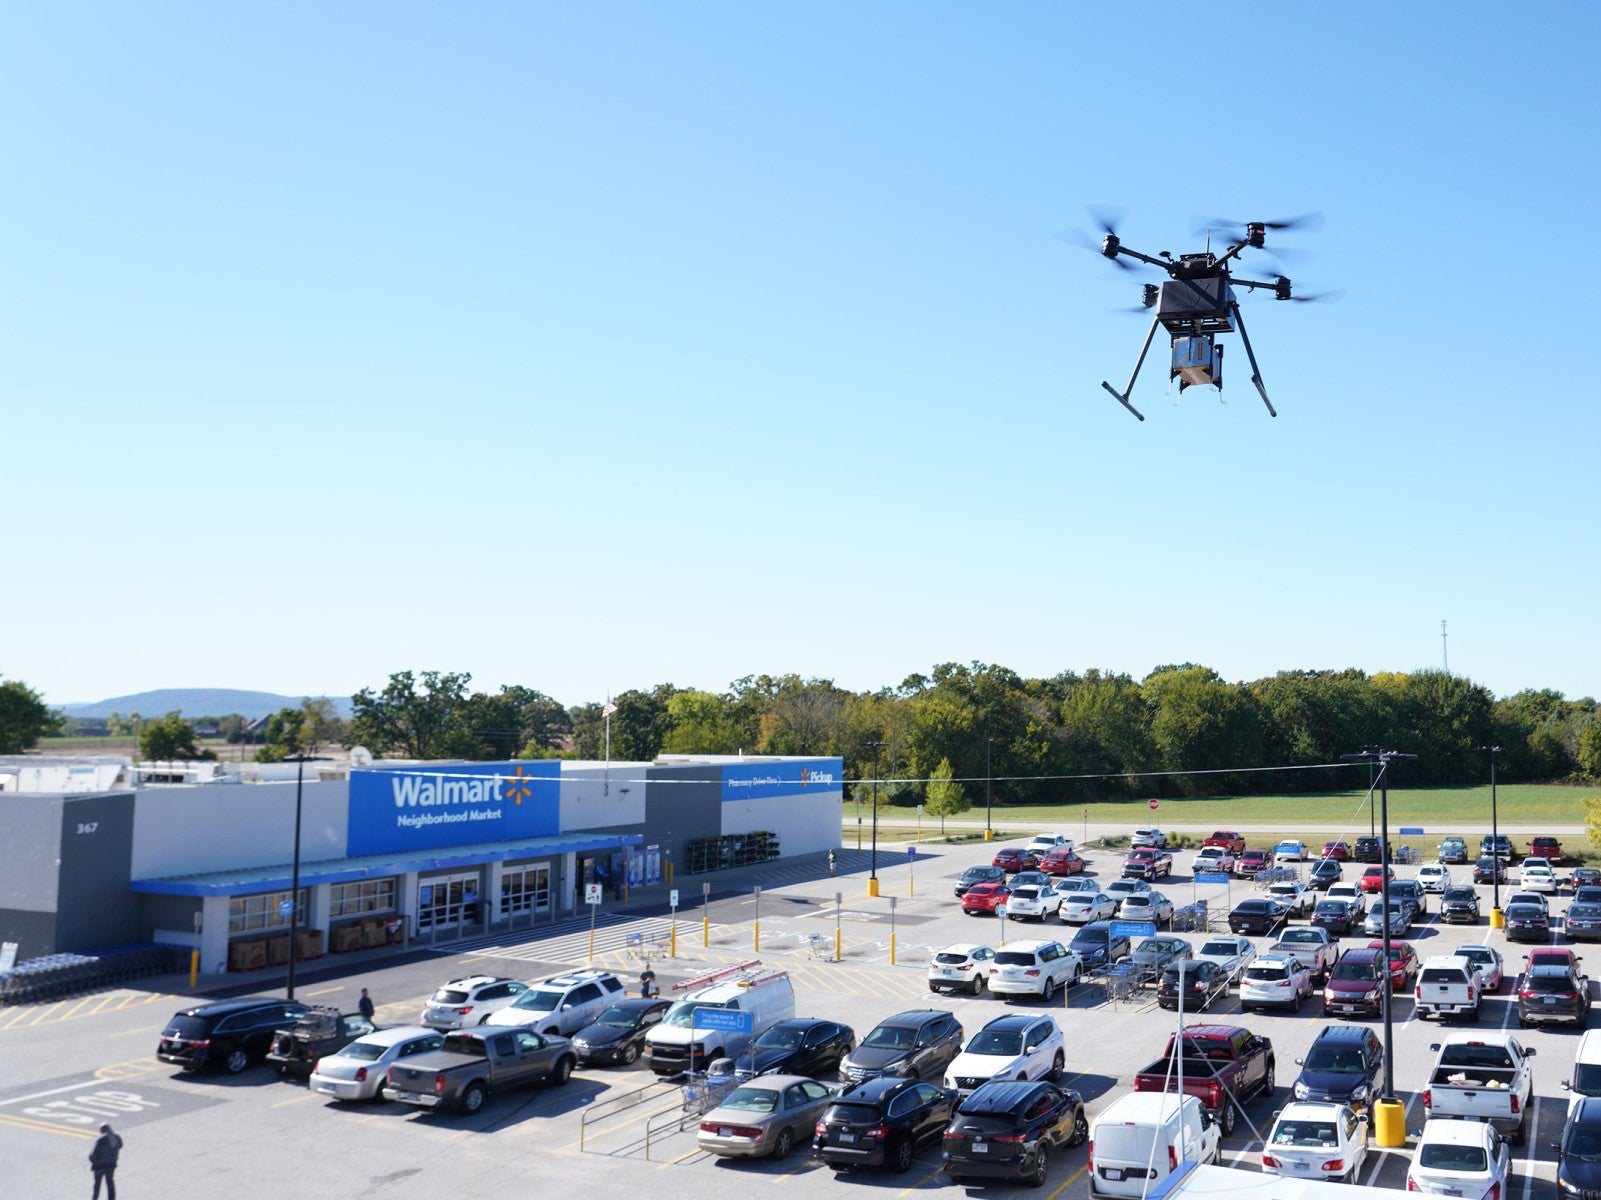 An image released by Walmart of one of its drones